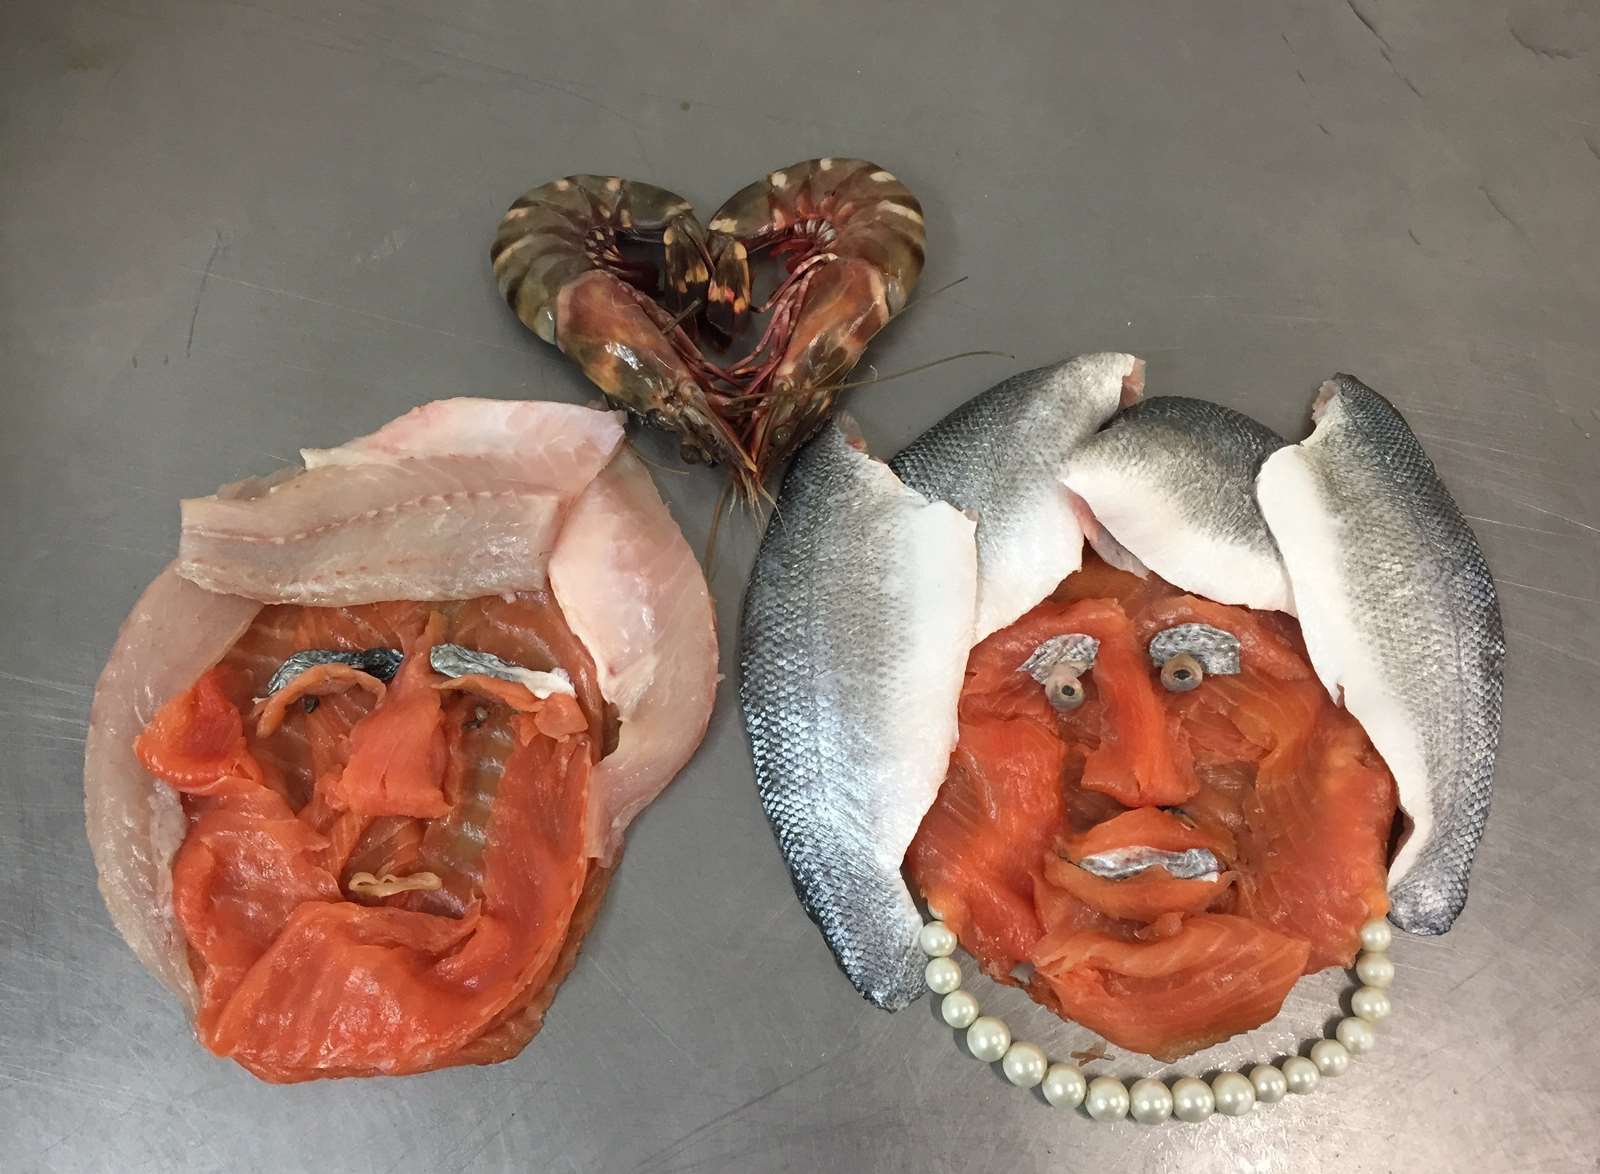 Donald Trump and Theresa May's 'special relationship' has been made out of fish. Picture: Terry Noakes